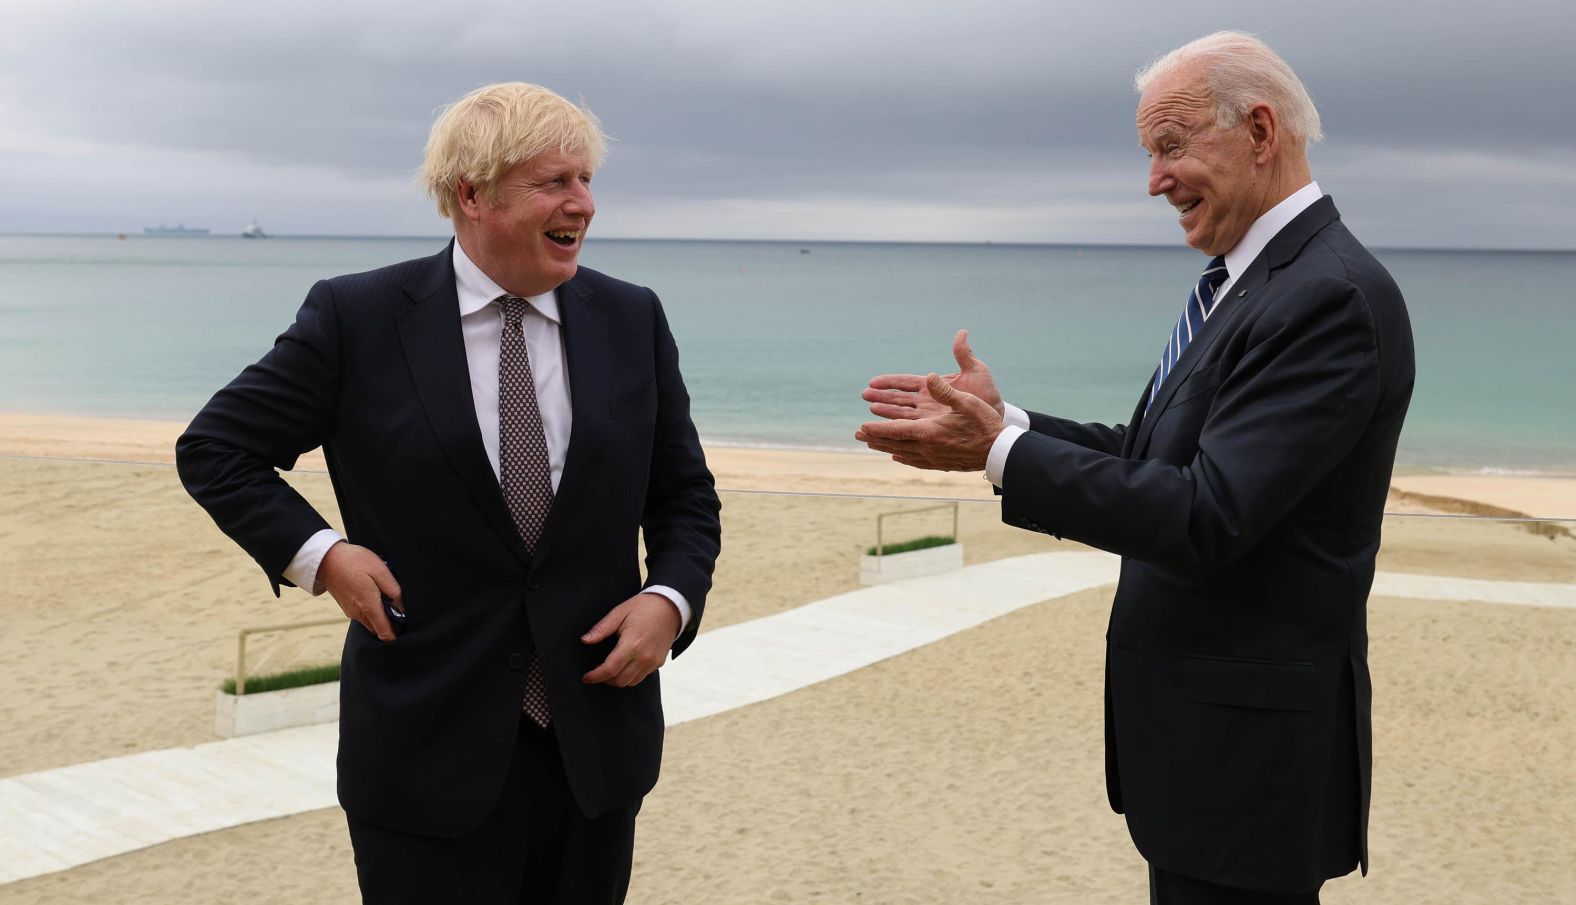 Biden and British Prime Minister Boris Johnson talk in Carbis Bay after their bilateral meeting on Thursday. Biden said his meeting with Johnson was "very productive" and <a href="index.php?page=&url=https%3A%2F%2Fwww.cnn.com%2Fworld%2Flive-news%2Fboris-johnson-joe-biden-uk-meeting-06-10-21%2Fh_4cba5f513a6654335950b23088a957ea" target="_blank">reaffirmed the special relationship between the countries.</a> He noted that the two countries have agreed to work together with <a href="index.php?page=&url=https%3A%2F%2Fwww.cnn.com%2F2021%2F06%2F10%2Fpolitics%2Fnew-atlantic-charter%2Findex.html" target="_blank">a revitalized Atlantic Charter,</a> which includes addressing cybersecurity and climate change.